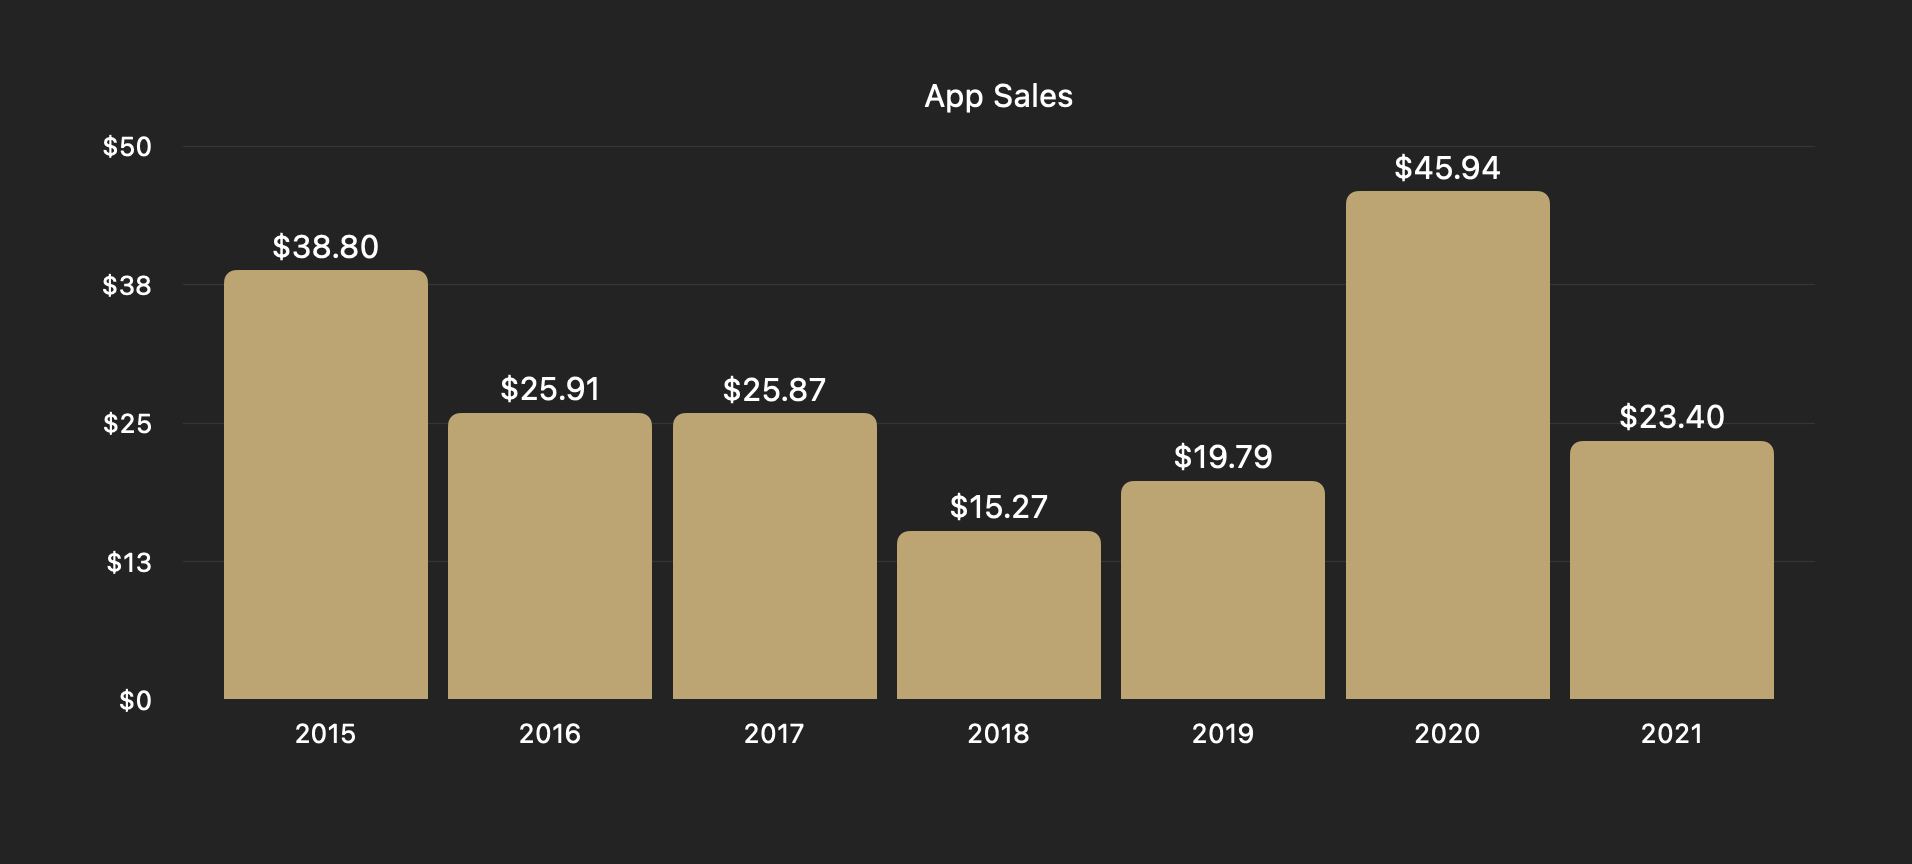 Fight Scores App Sales over the years